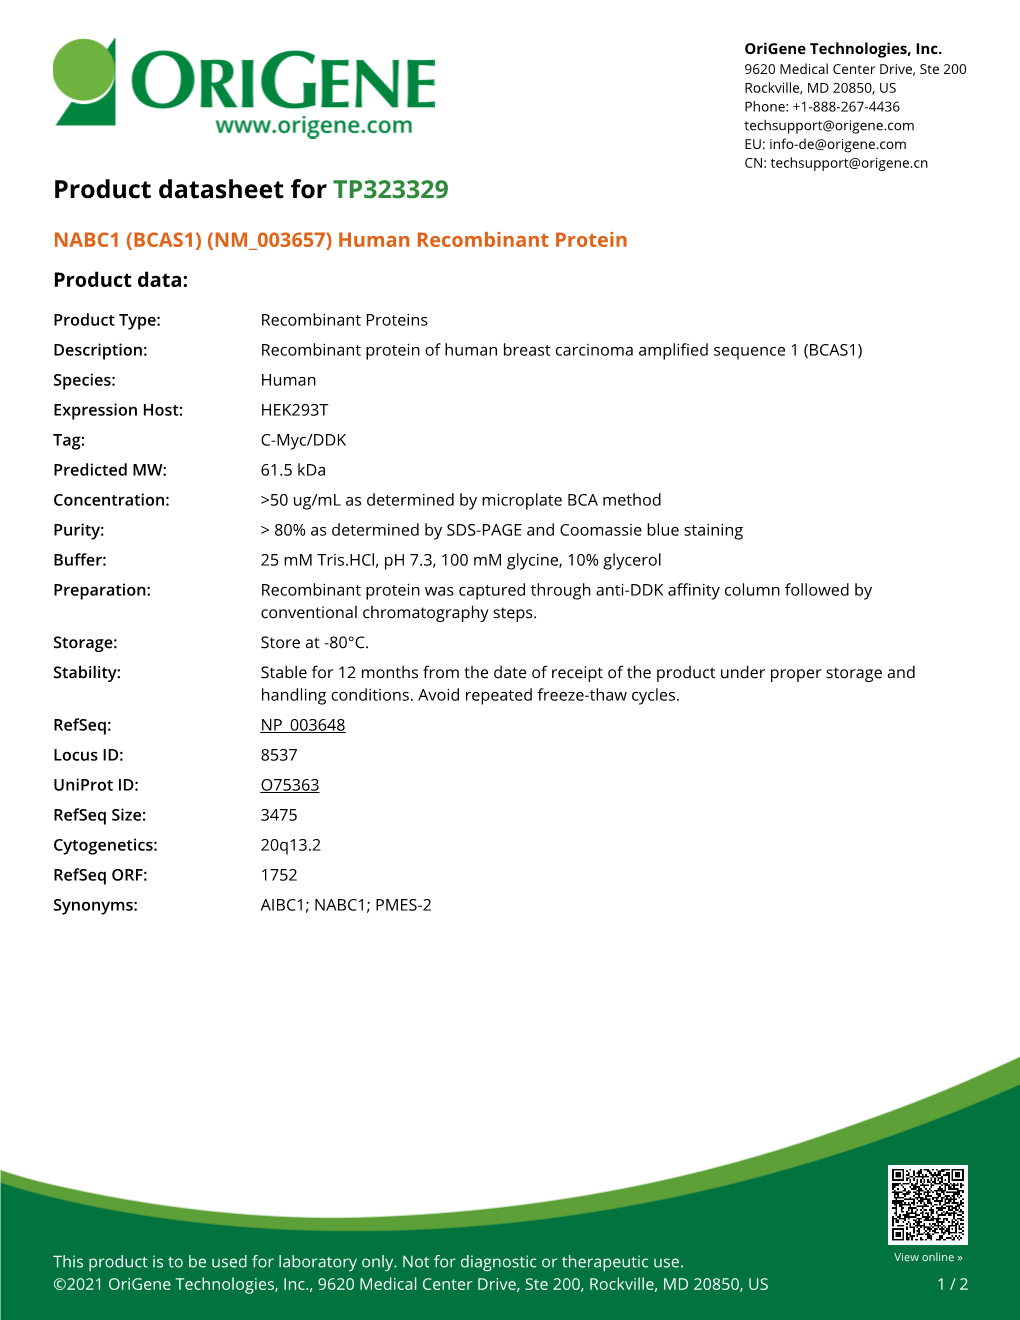 NABC1 (BCAS1) (NM 003657) Human Recombinant Protein Product Data